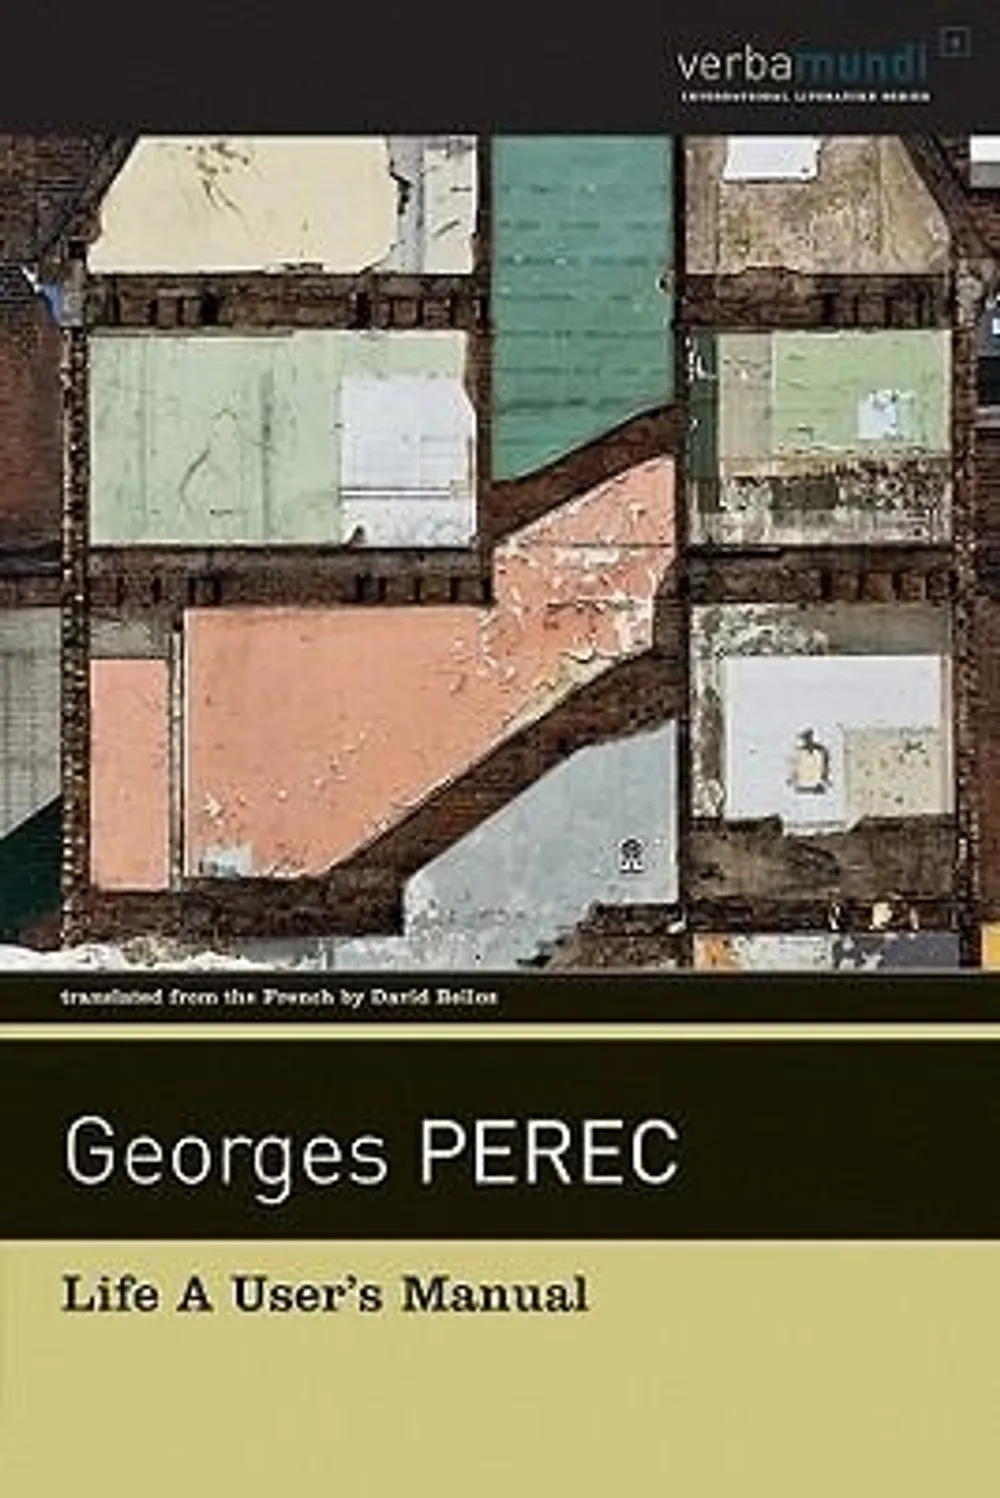 Life: A User's Manual, by Georges Perec